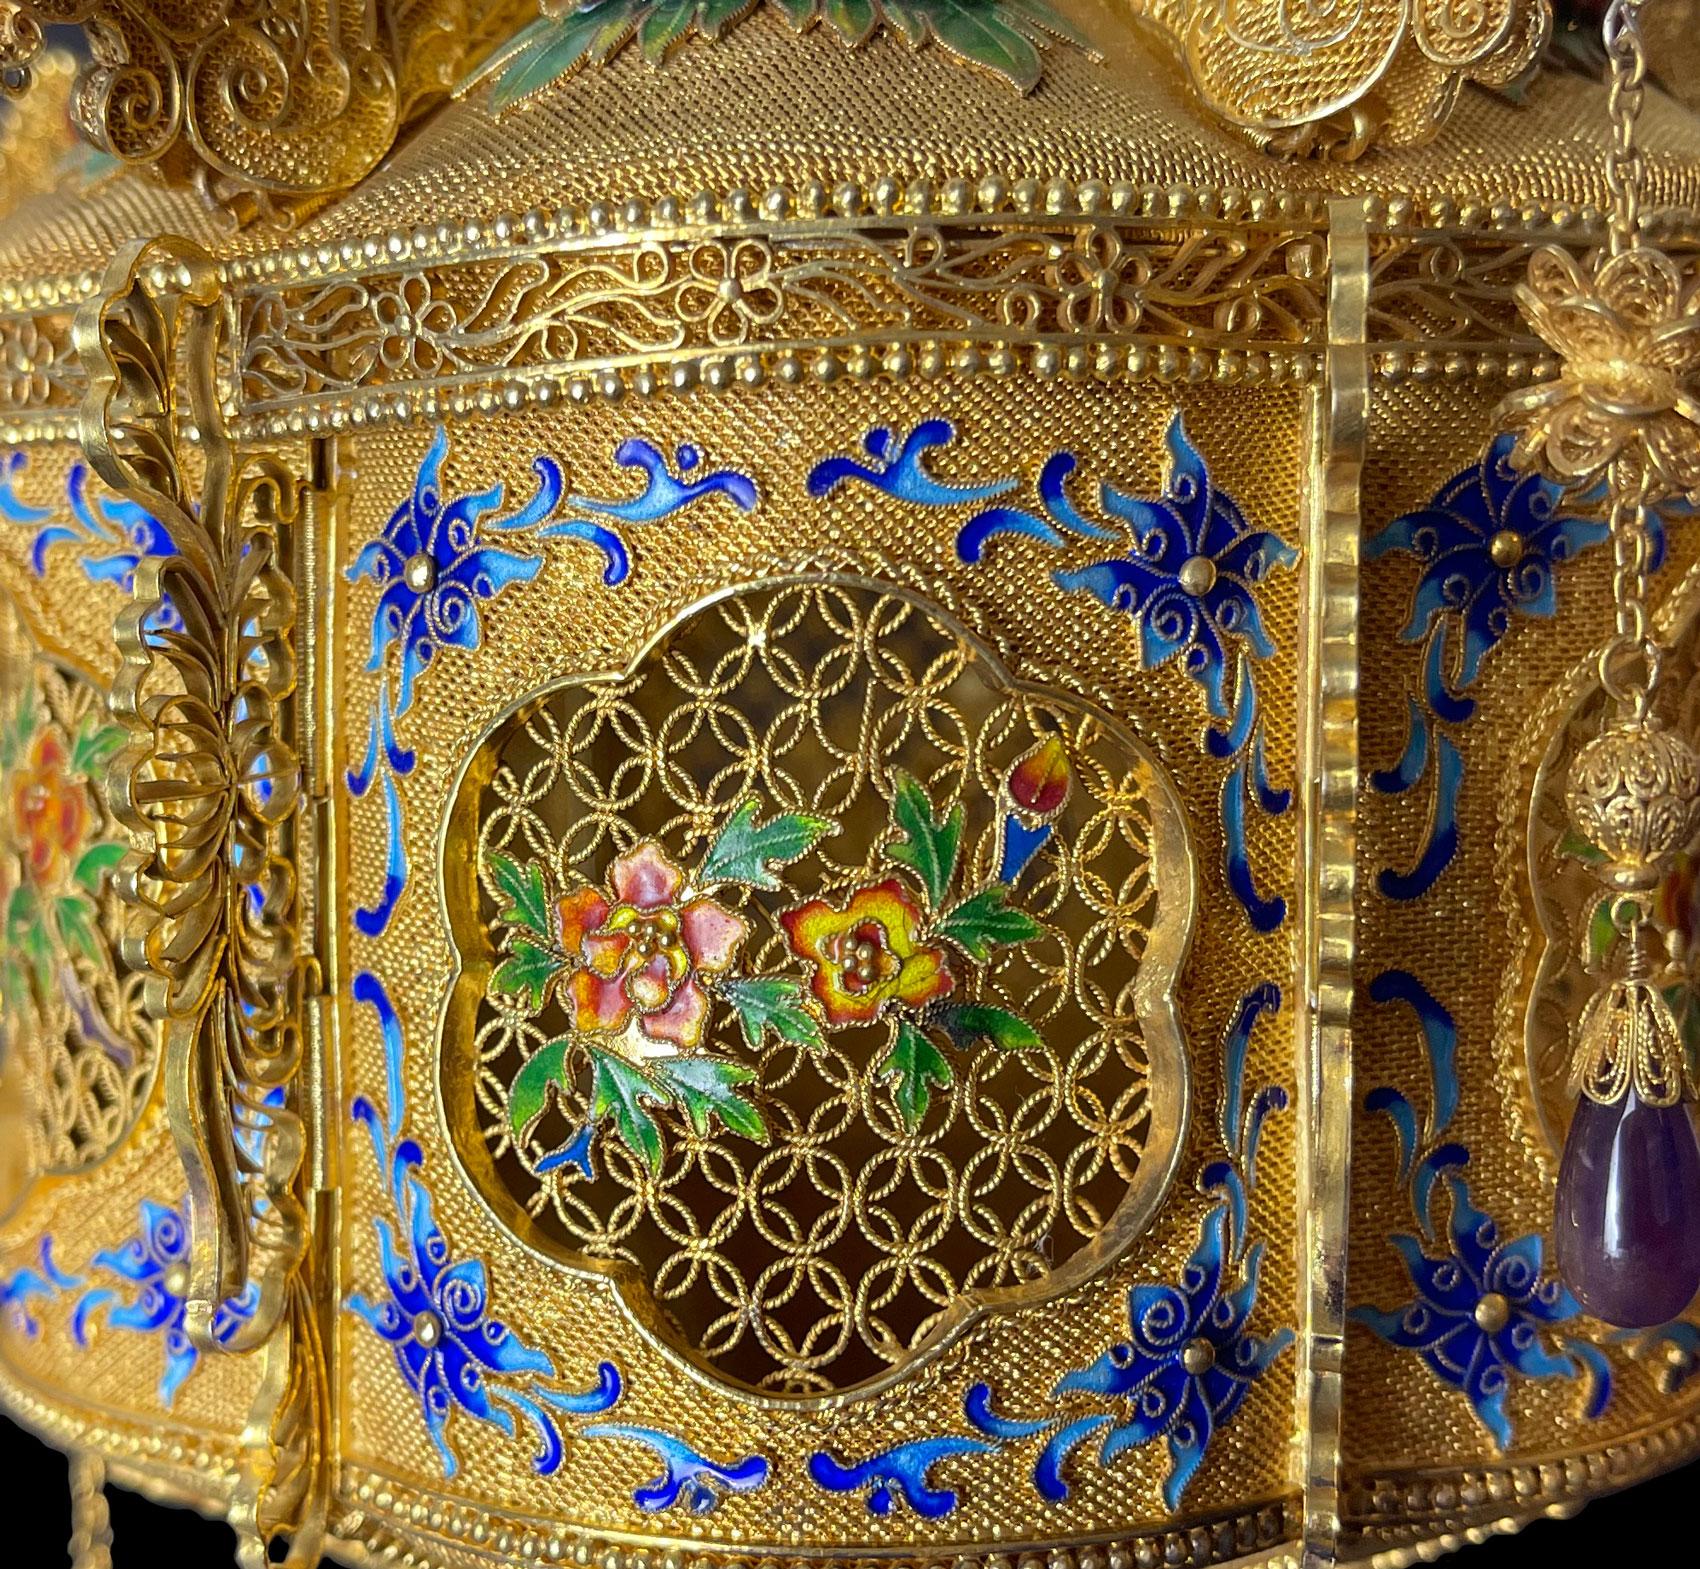 Chinese Enameled & Jeweled Gilt Silver Filigree Work Potpourri Urn, Circa 1900 In Good Condition For Sale In Pasadena, CA